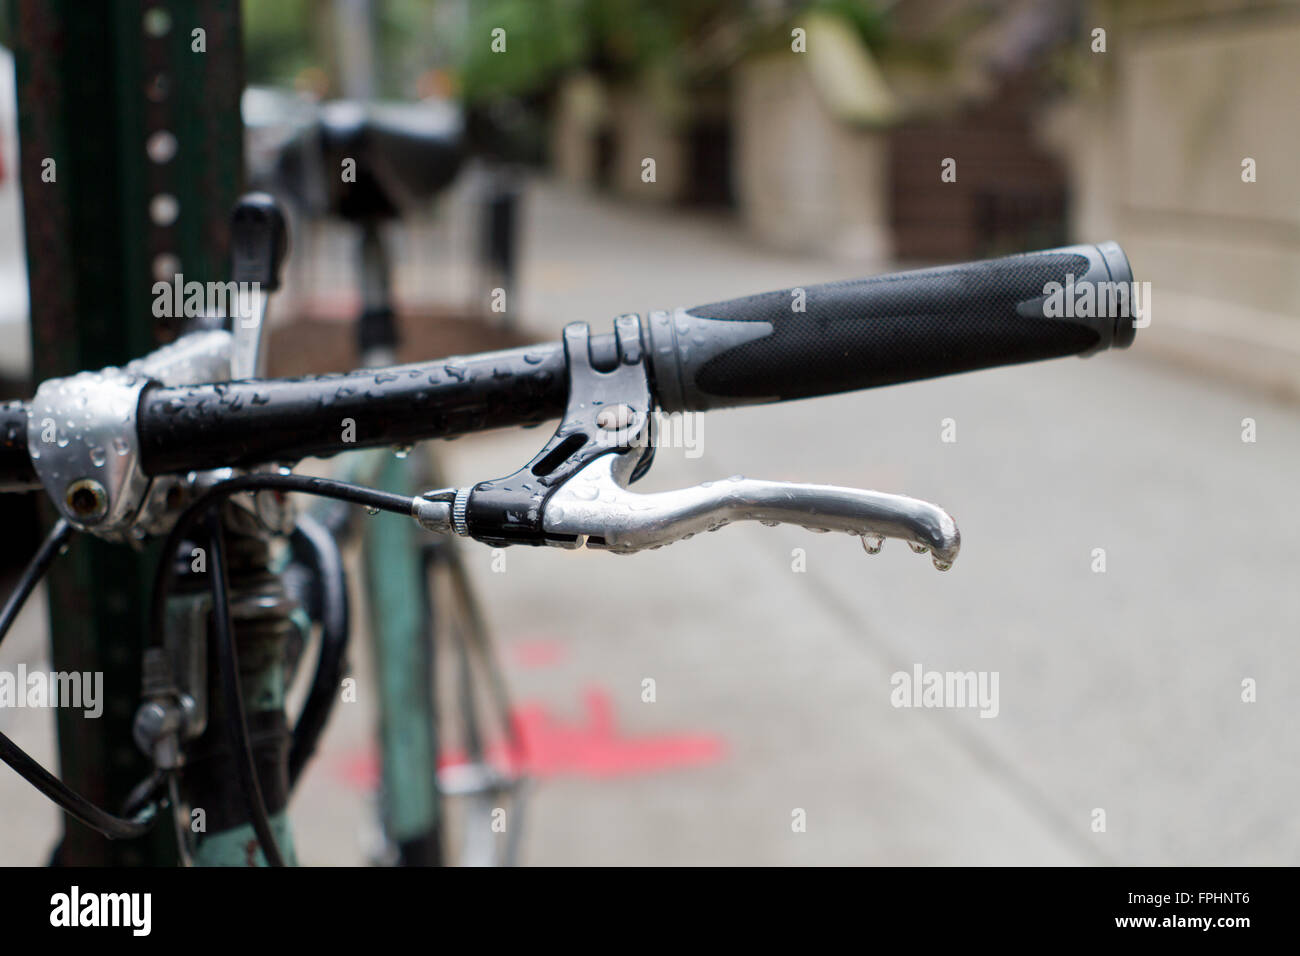 Urban bicycle attached to pole after rain Stock Photo